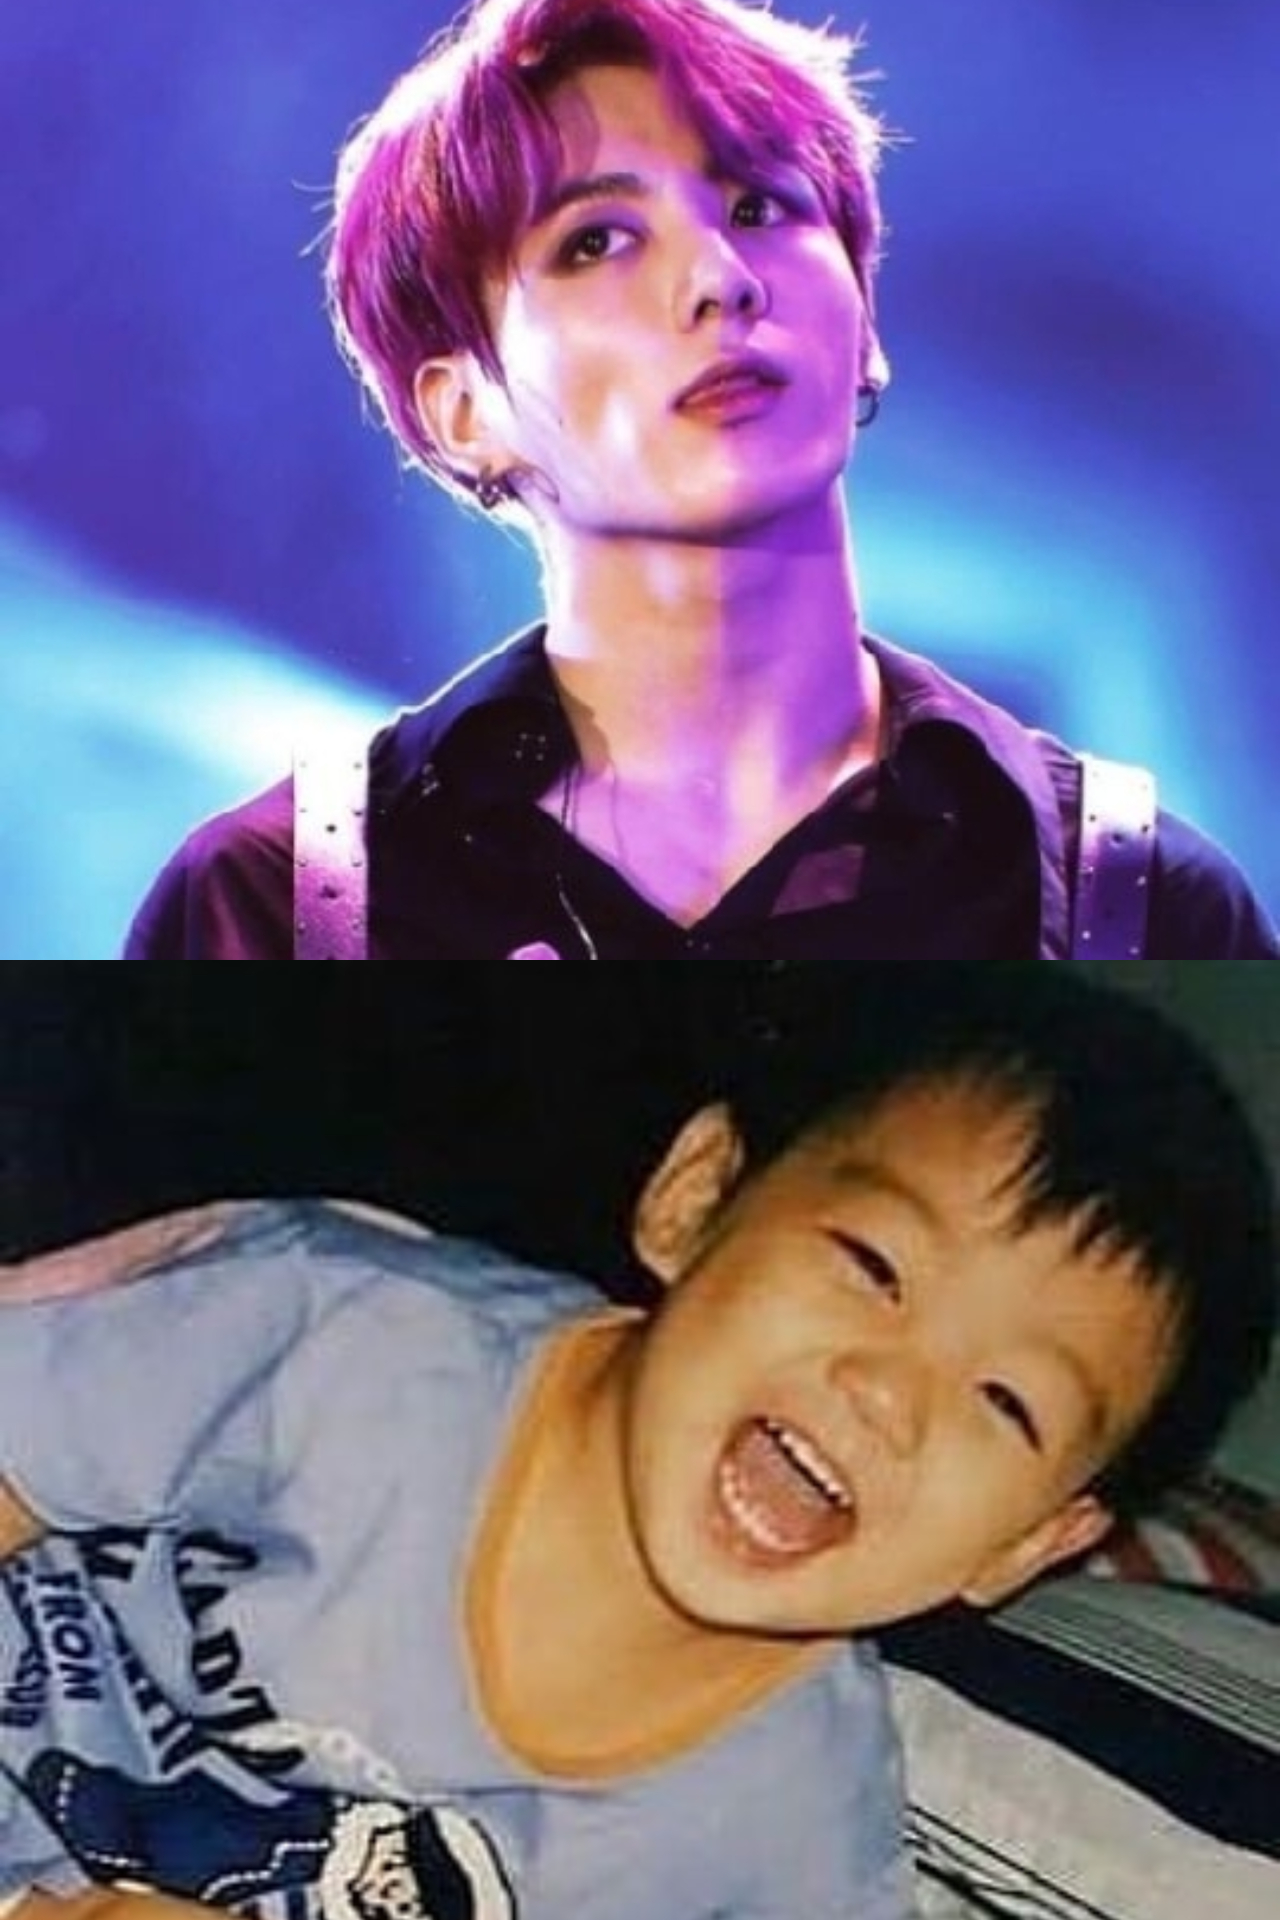 BTS Jungkook's childhood photos are the cutest thing on the internet.